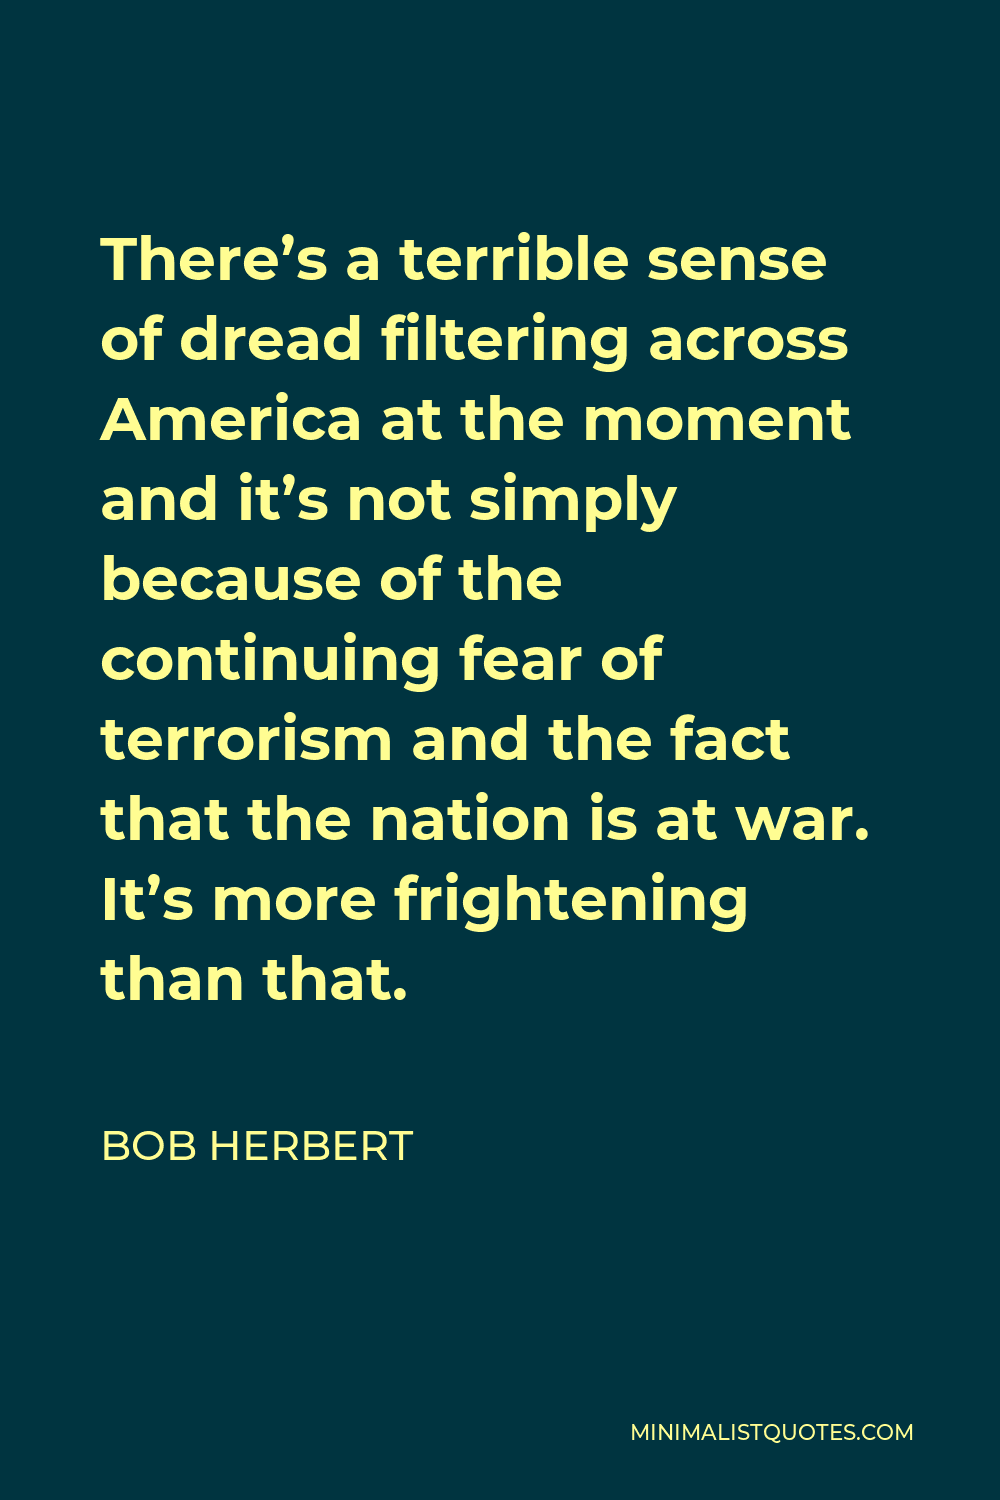 Bob Herbert Quote - There’s a terrible sense of dread filtering across America at the moment and it’s not simply because of the continuing fear of terrorism and the fact that the nation is at war. It’s more frightening than that.